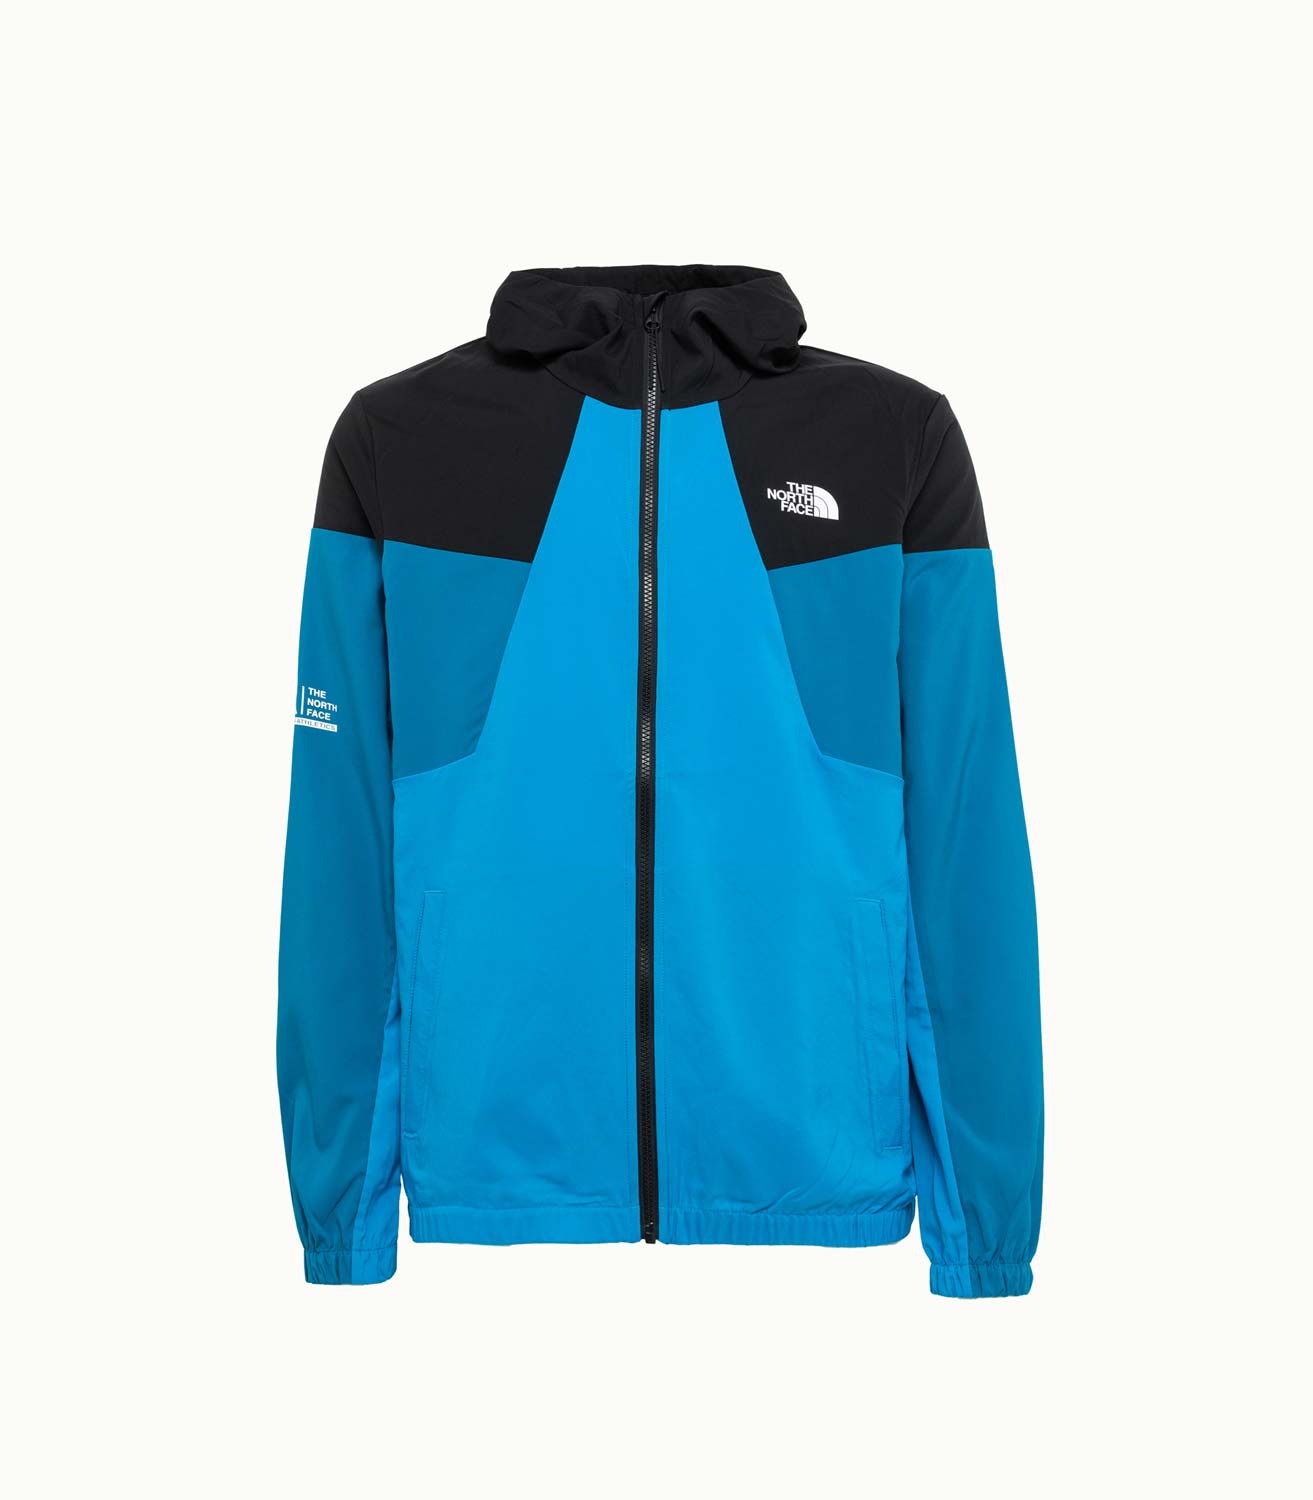 The North Face Mountain Athletics FlashDry wind jacket in black